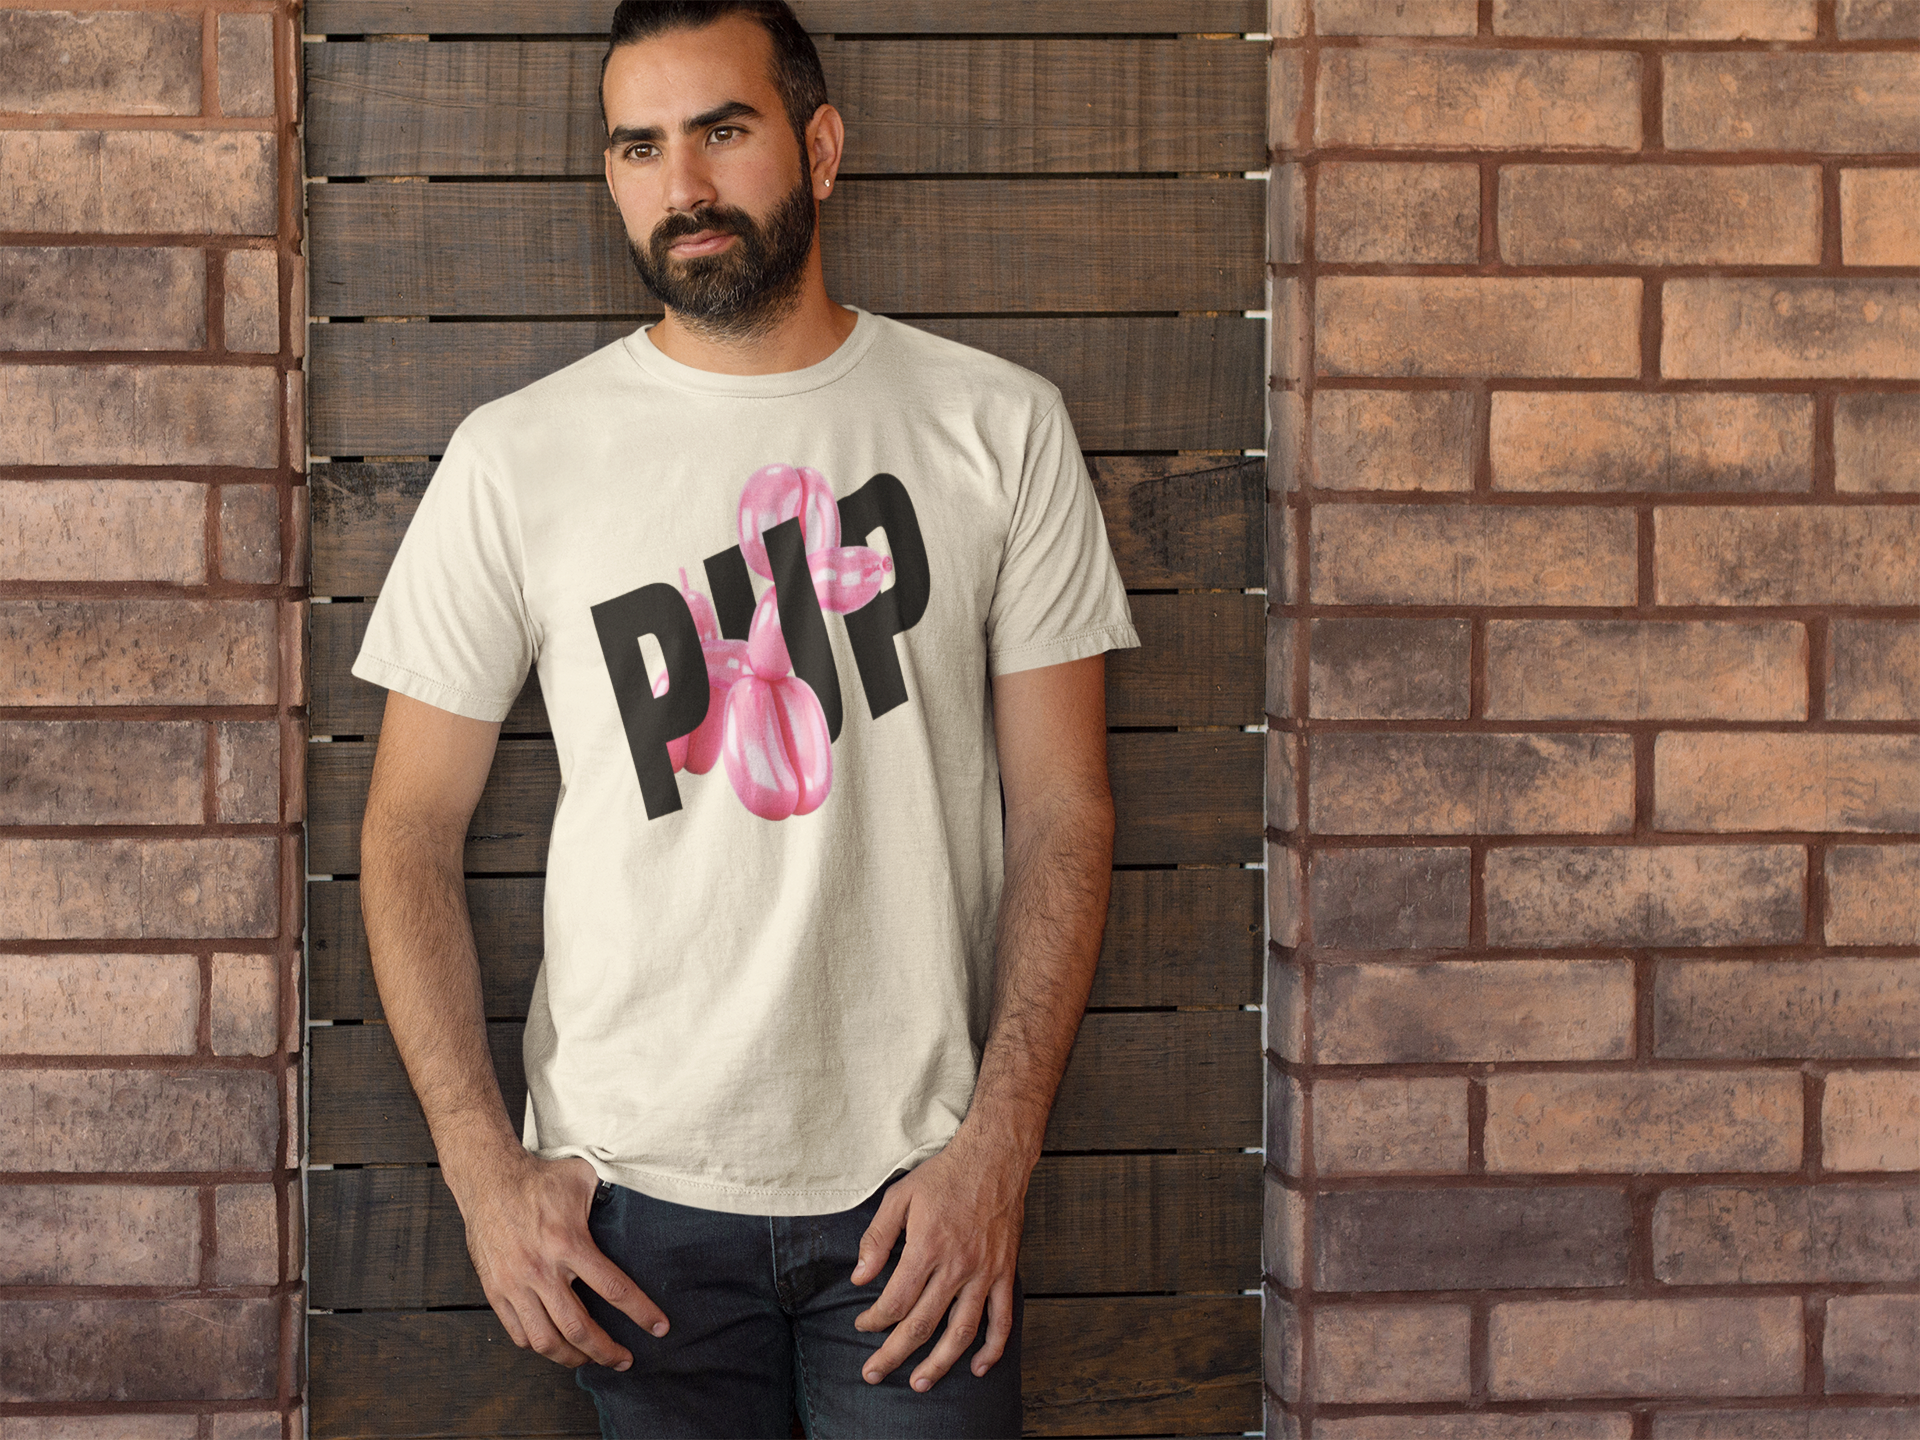 handsome man wearing a Jeff Koon's inspired gay puppy play tshirt